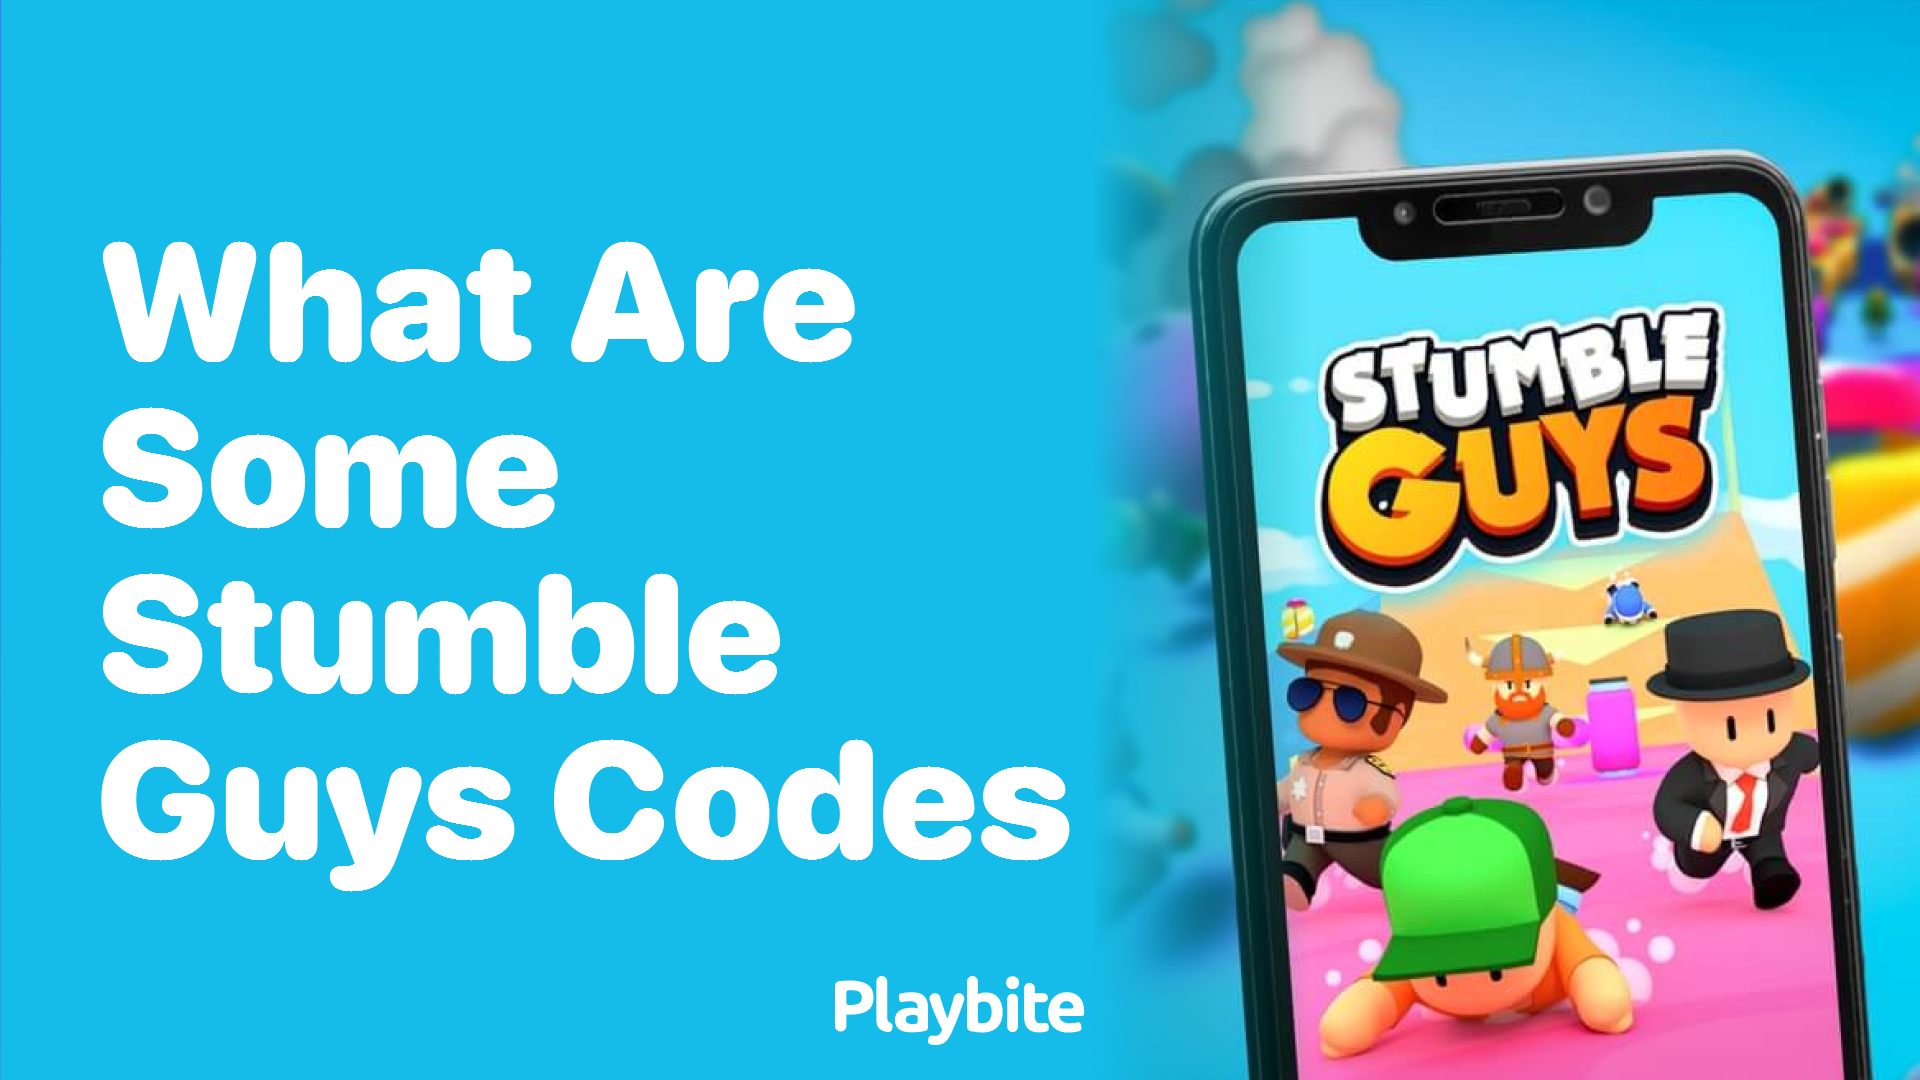 What Are Some Stumble Guys Codes? Dive Into the Details!